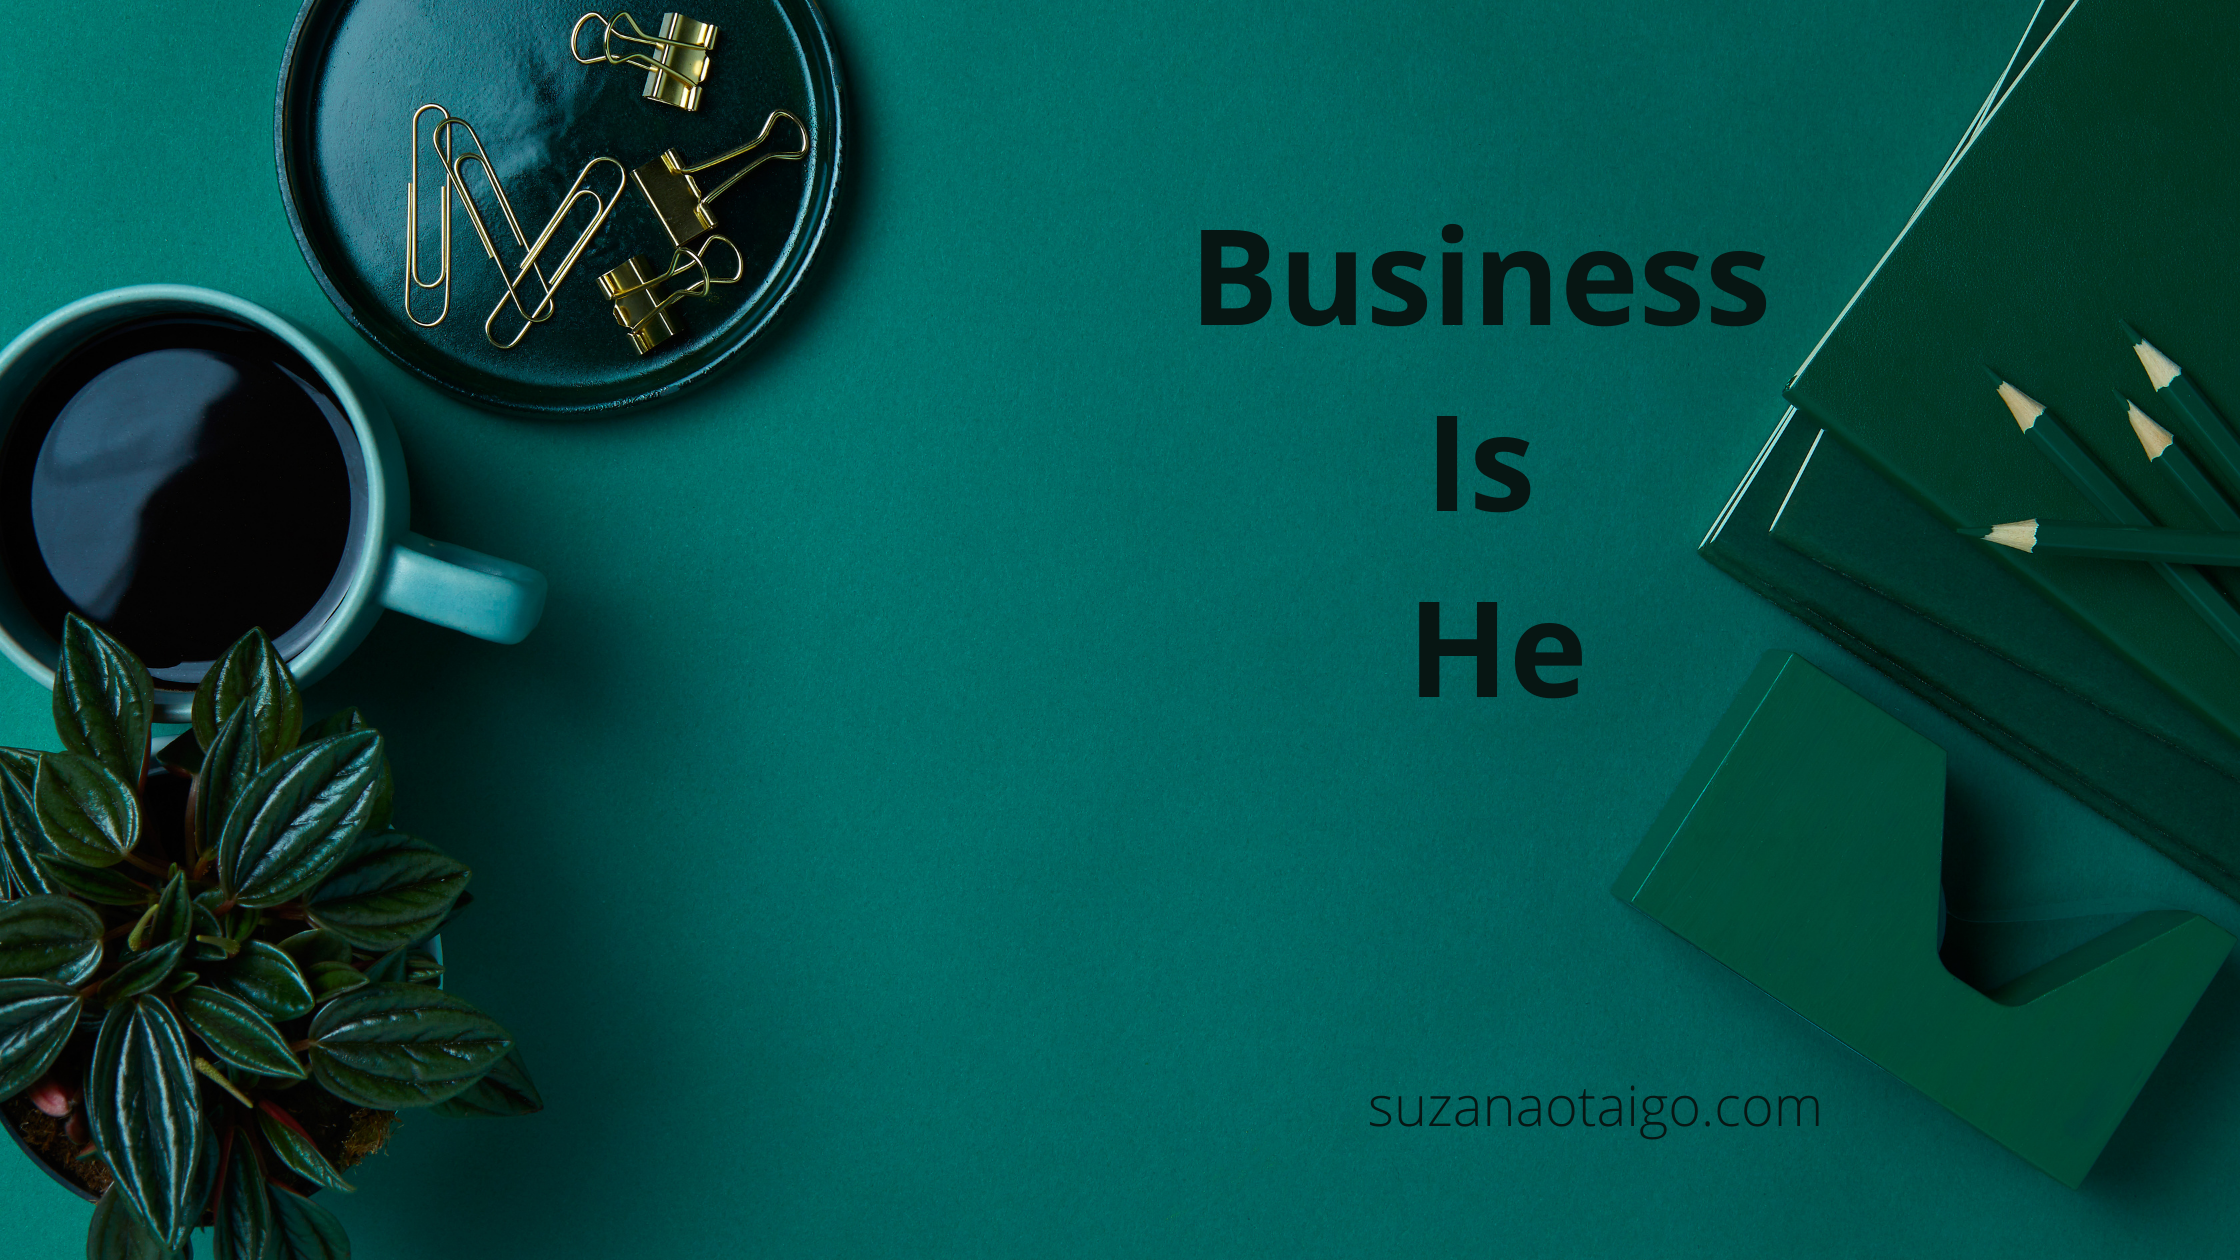 Business Is He